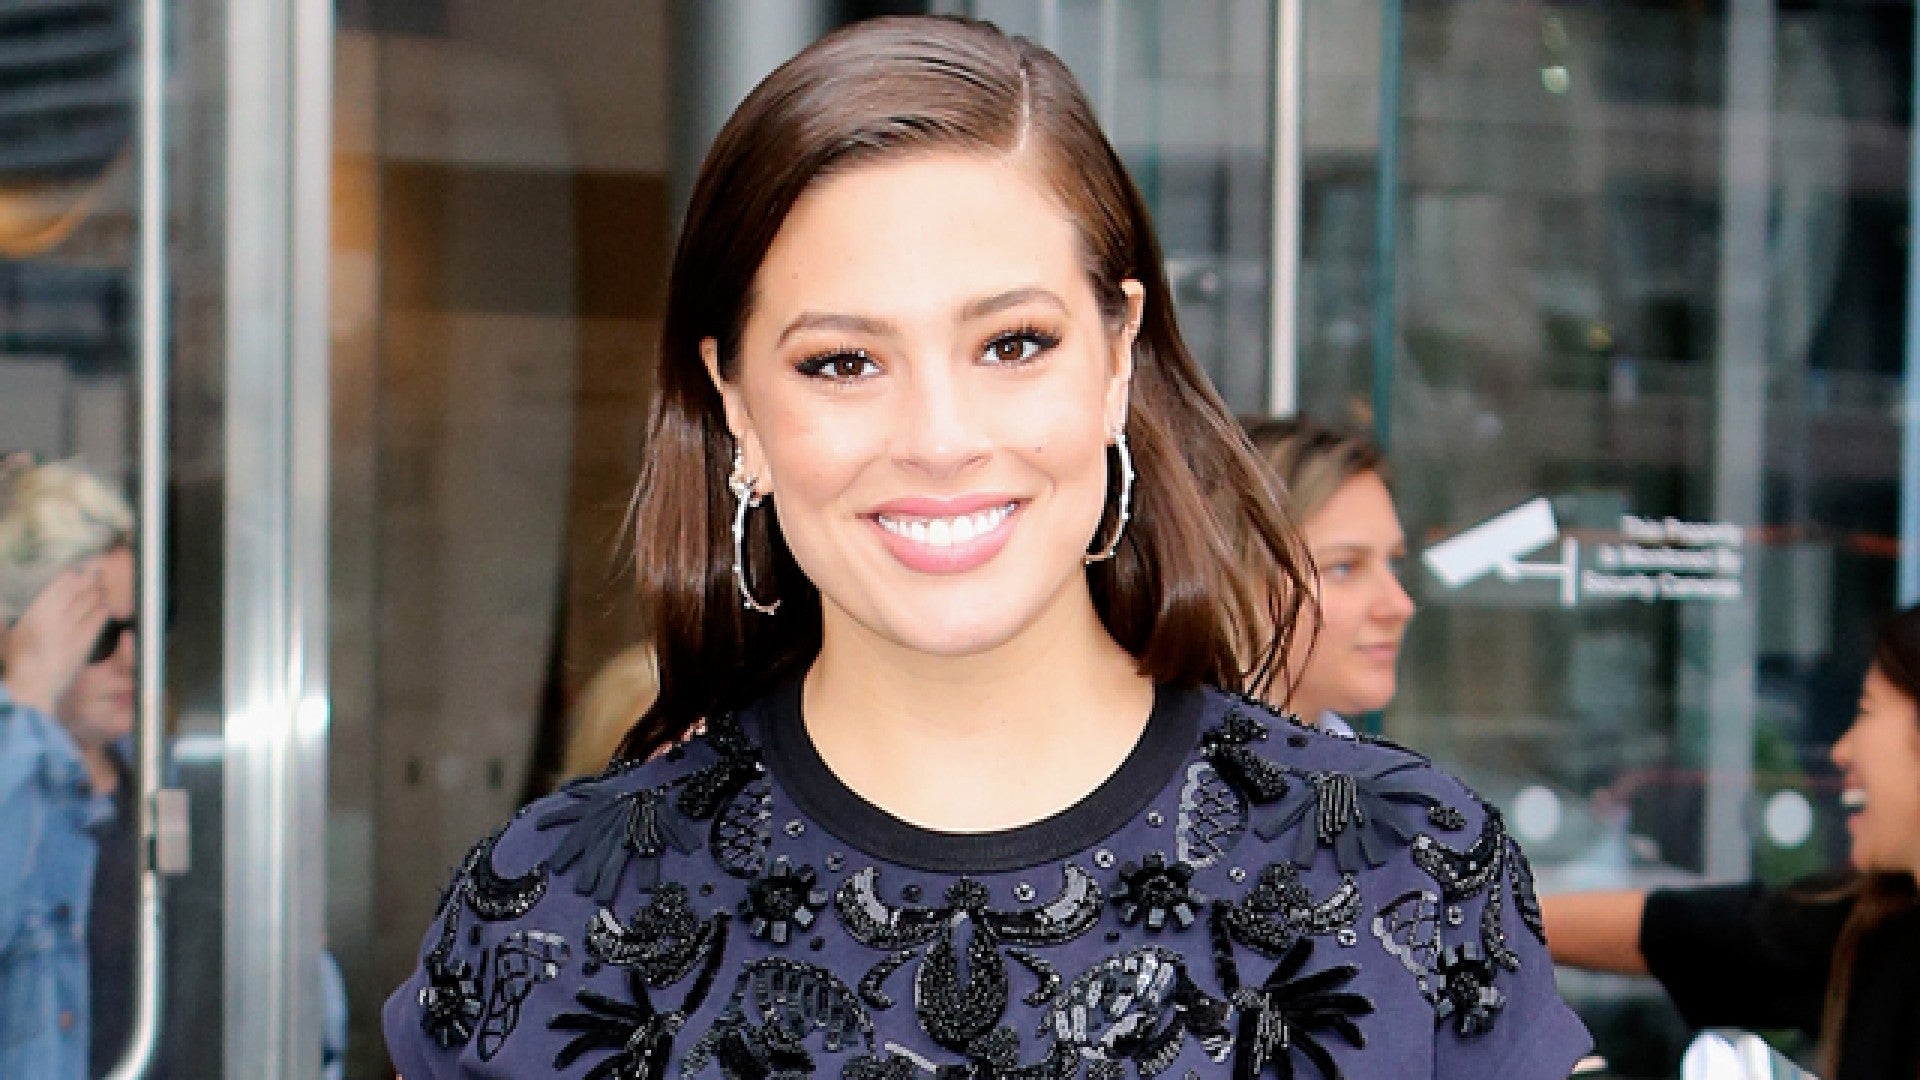 Ashley Graham puts on a sultry display in sheer sequined minidress